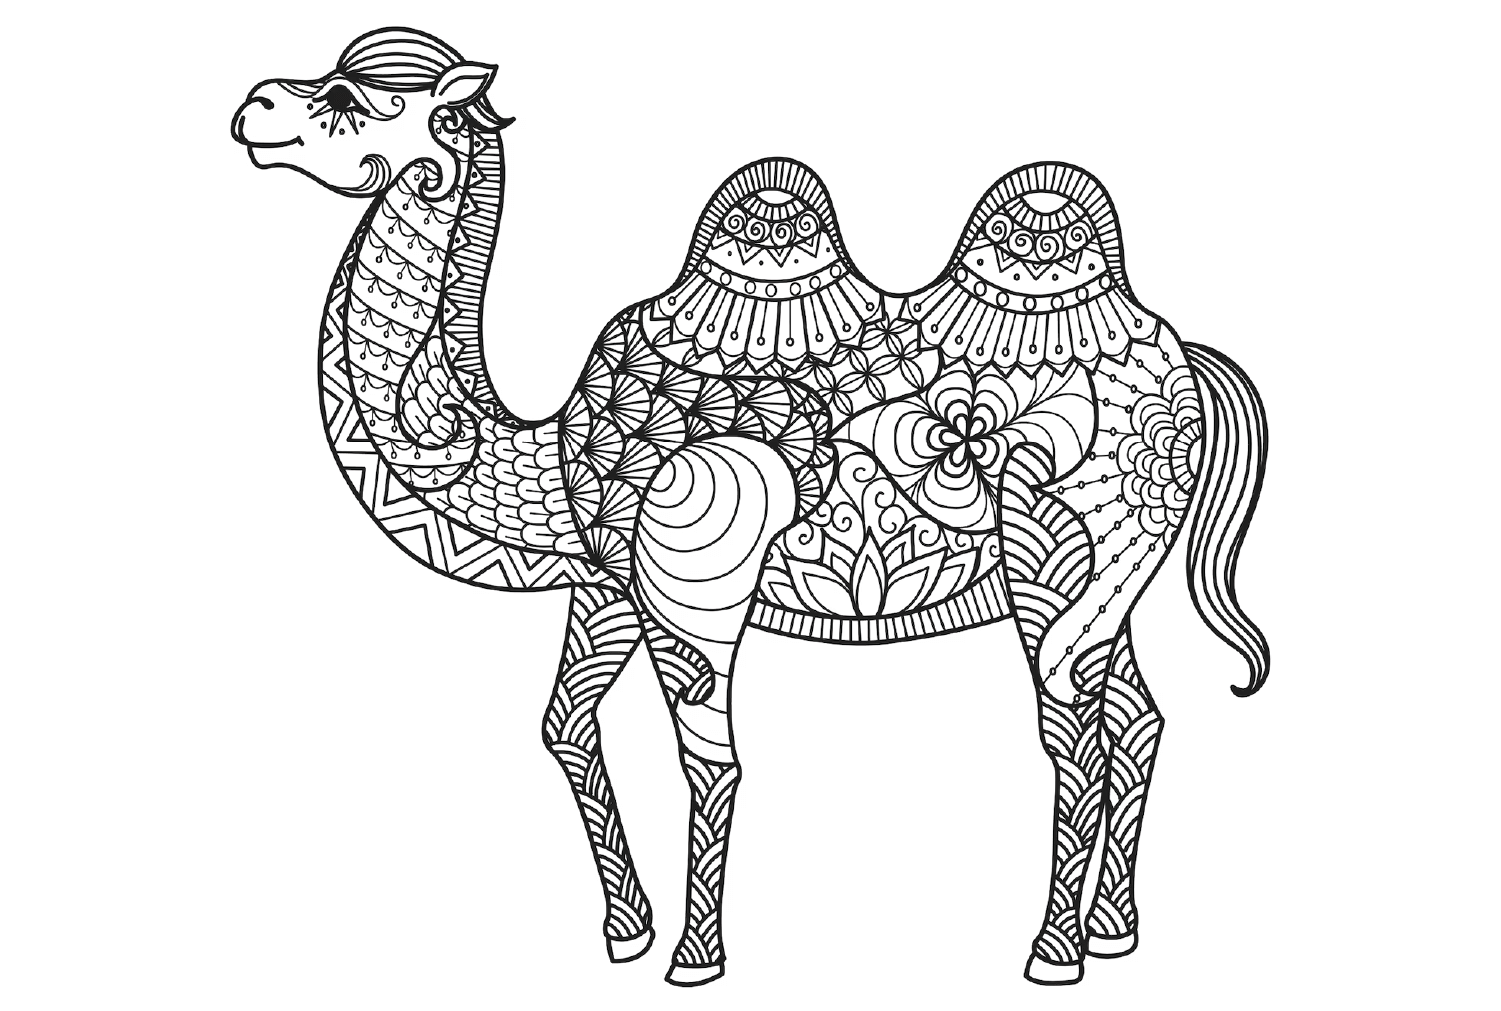 Zentangle Camel Coloring Page